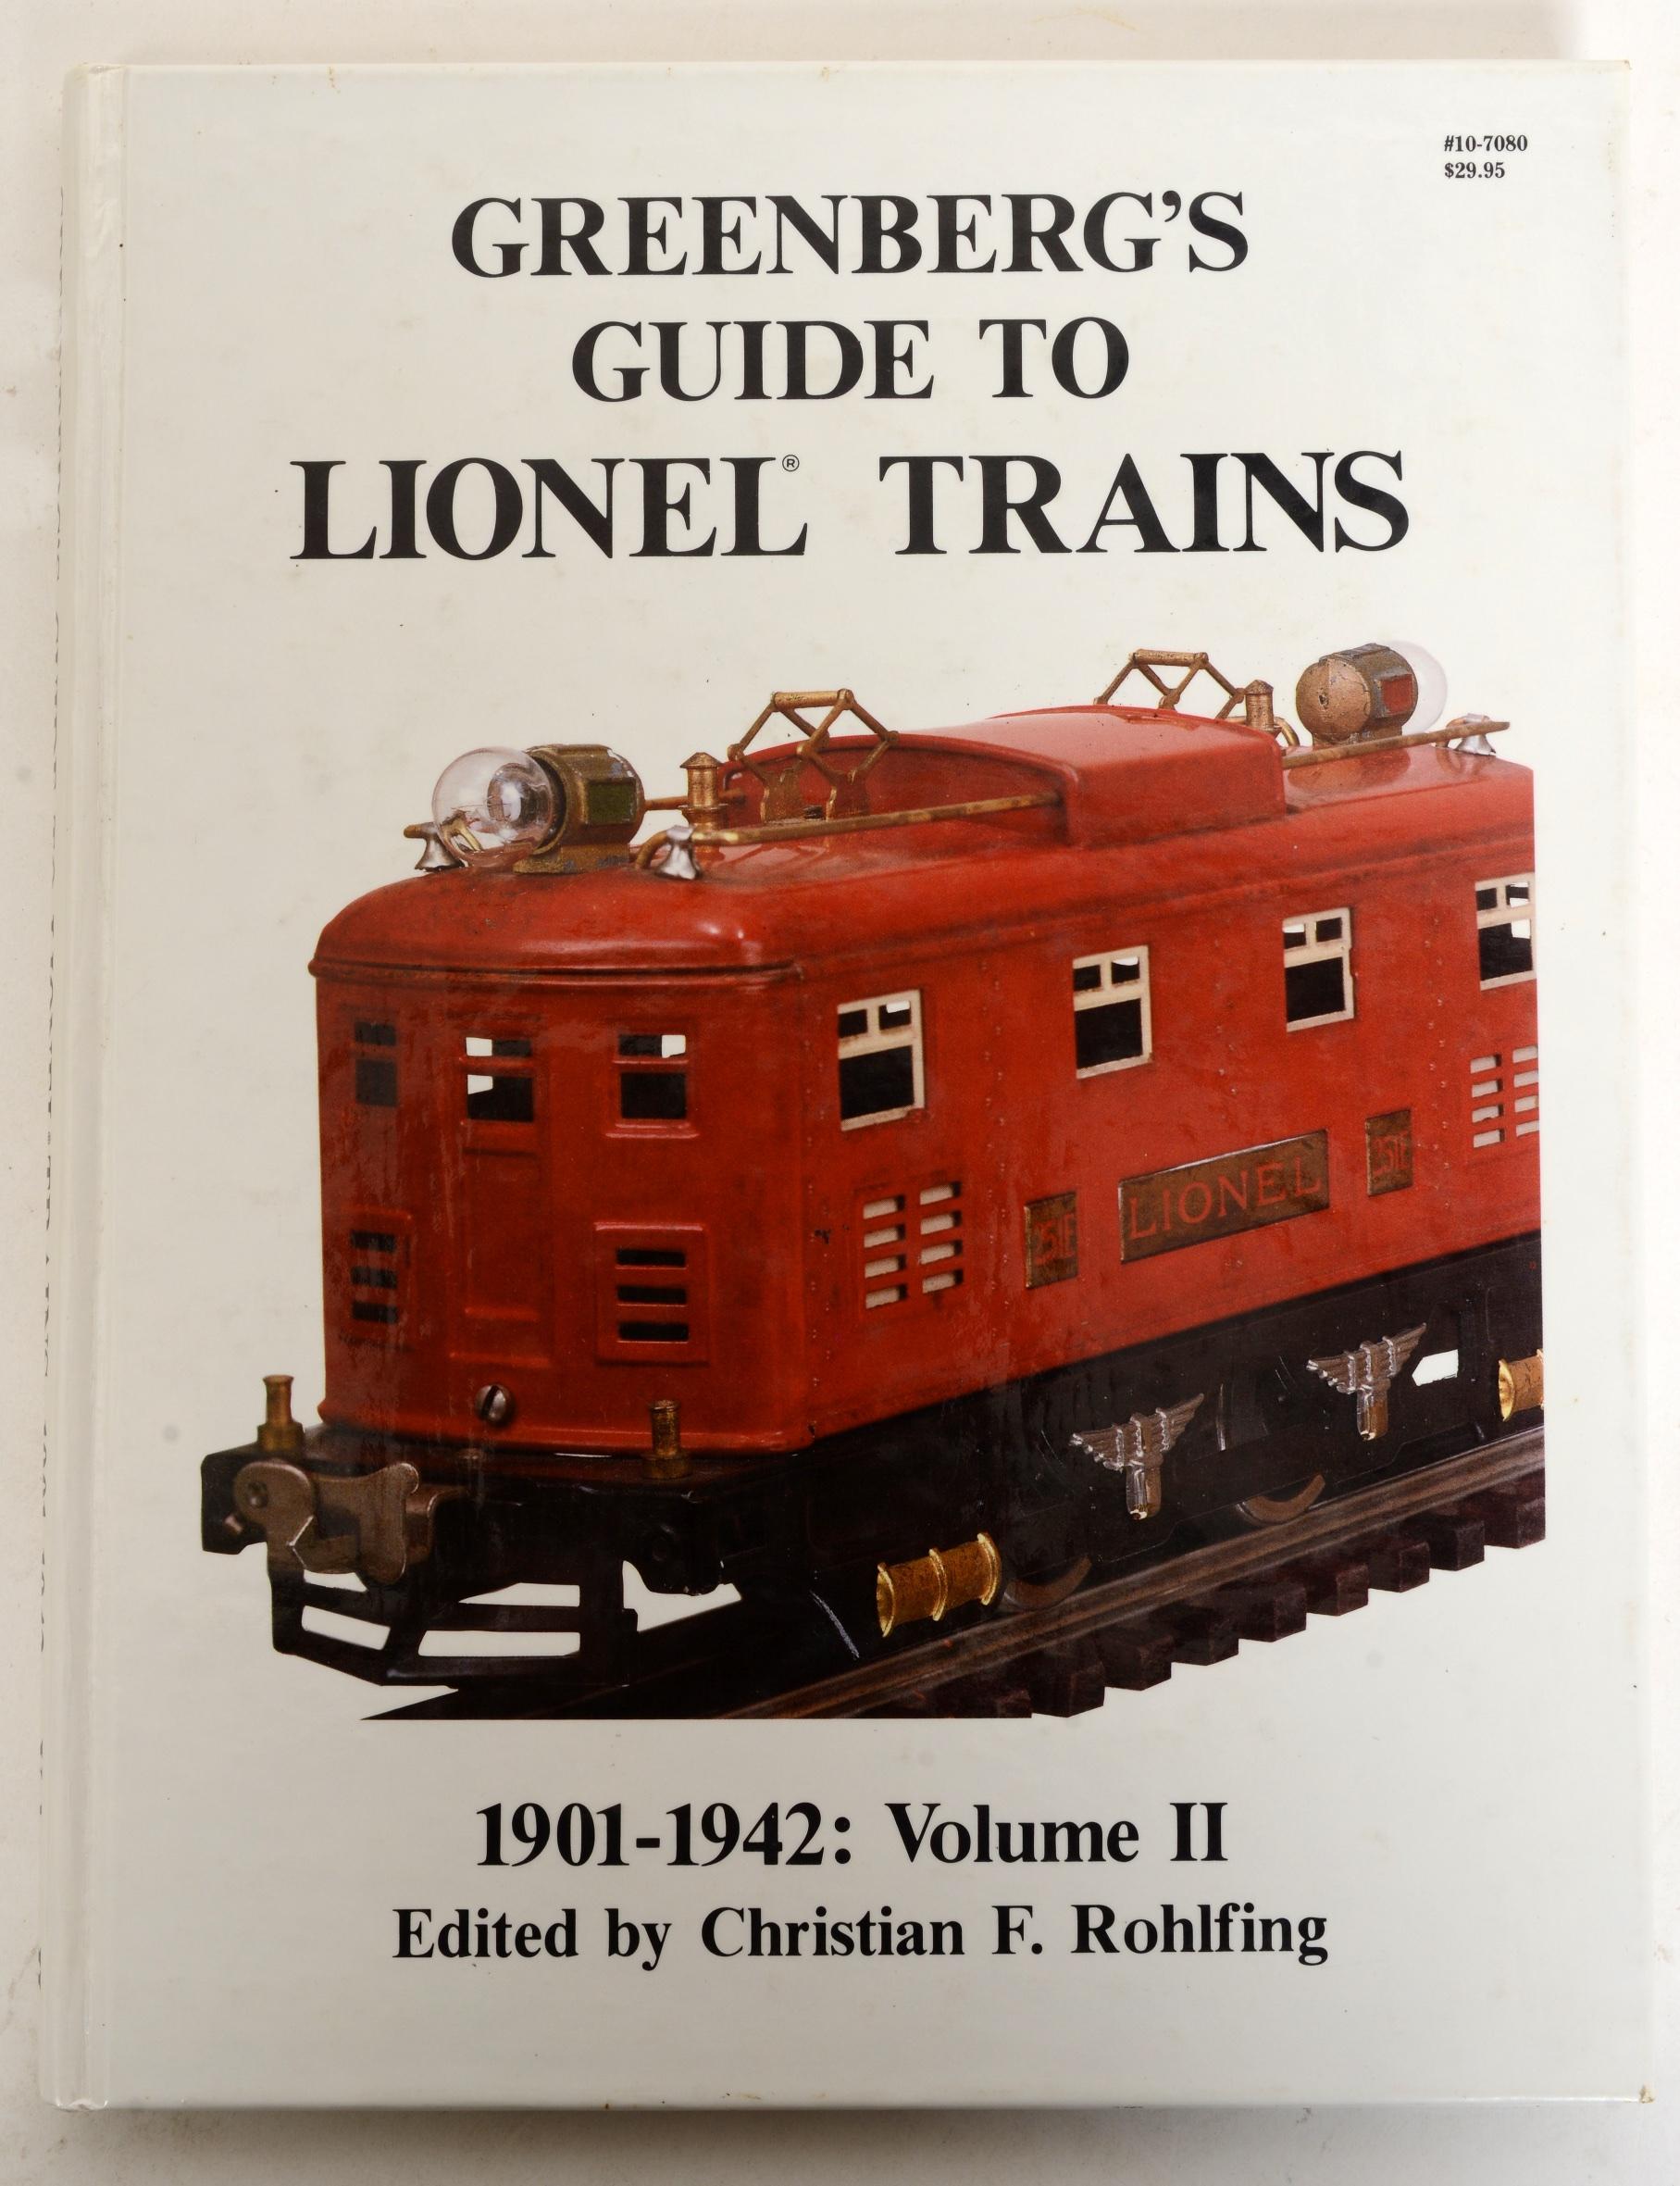 American Set of Six 1st Ed, Limited Ed and Signed Books on Lionel Toy Trains For Sale